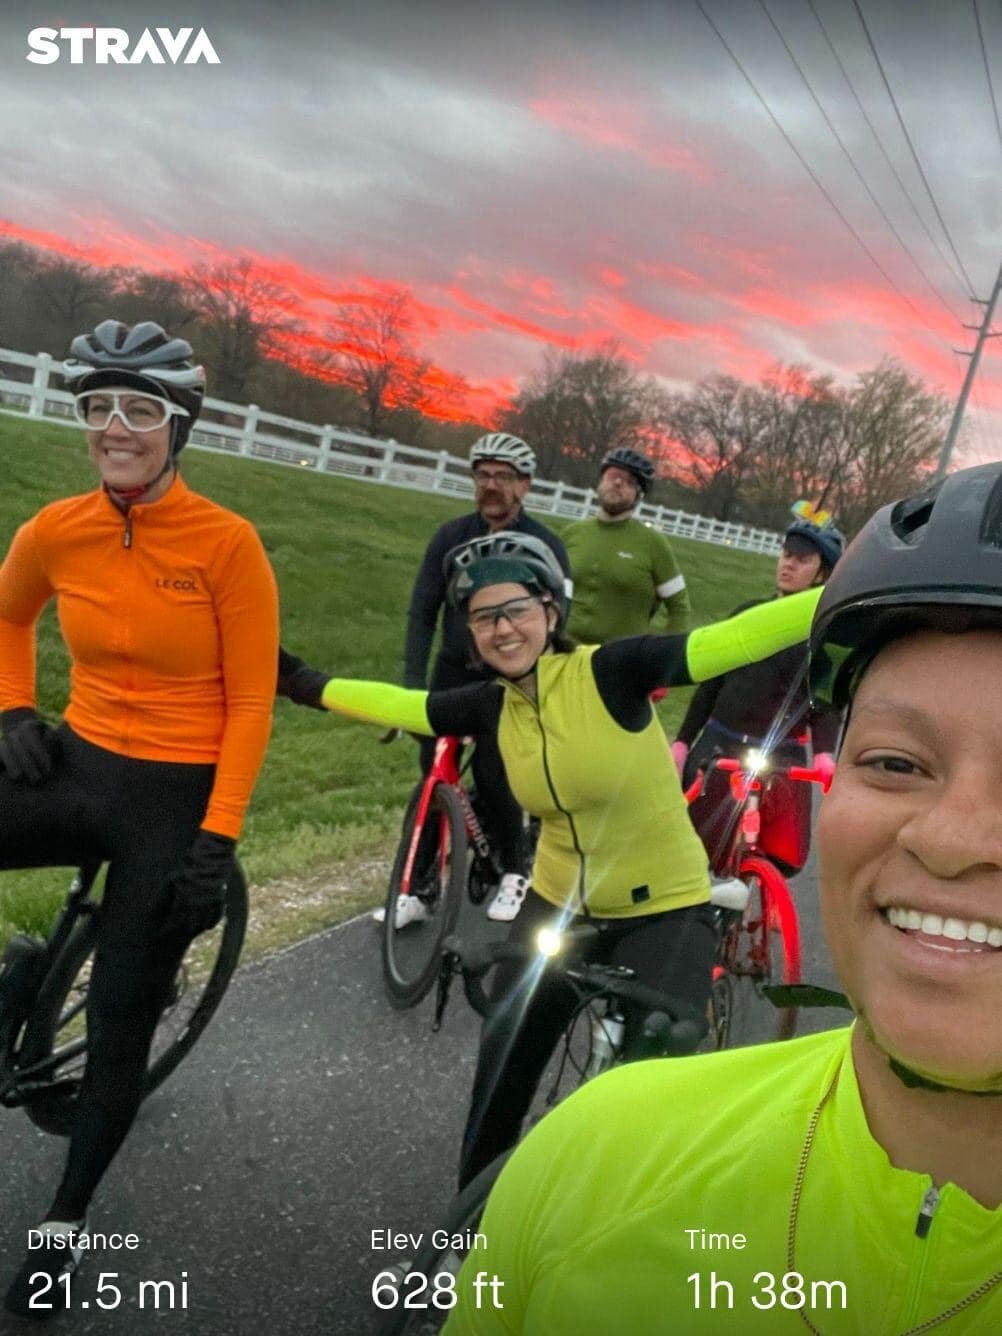 Finally made it to biking 100mi in a week, even tho my goal was 100mi on Saturday 😅 #77mi #21mi #2mi 😮&zwj;💨. P&rsquo;alante ☺️ 

If you&rsquo;d like to donate to my ability to participate in the May 2024 @majorknoxadventures ride following in the